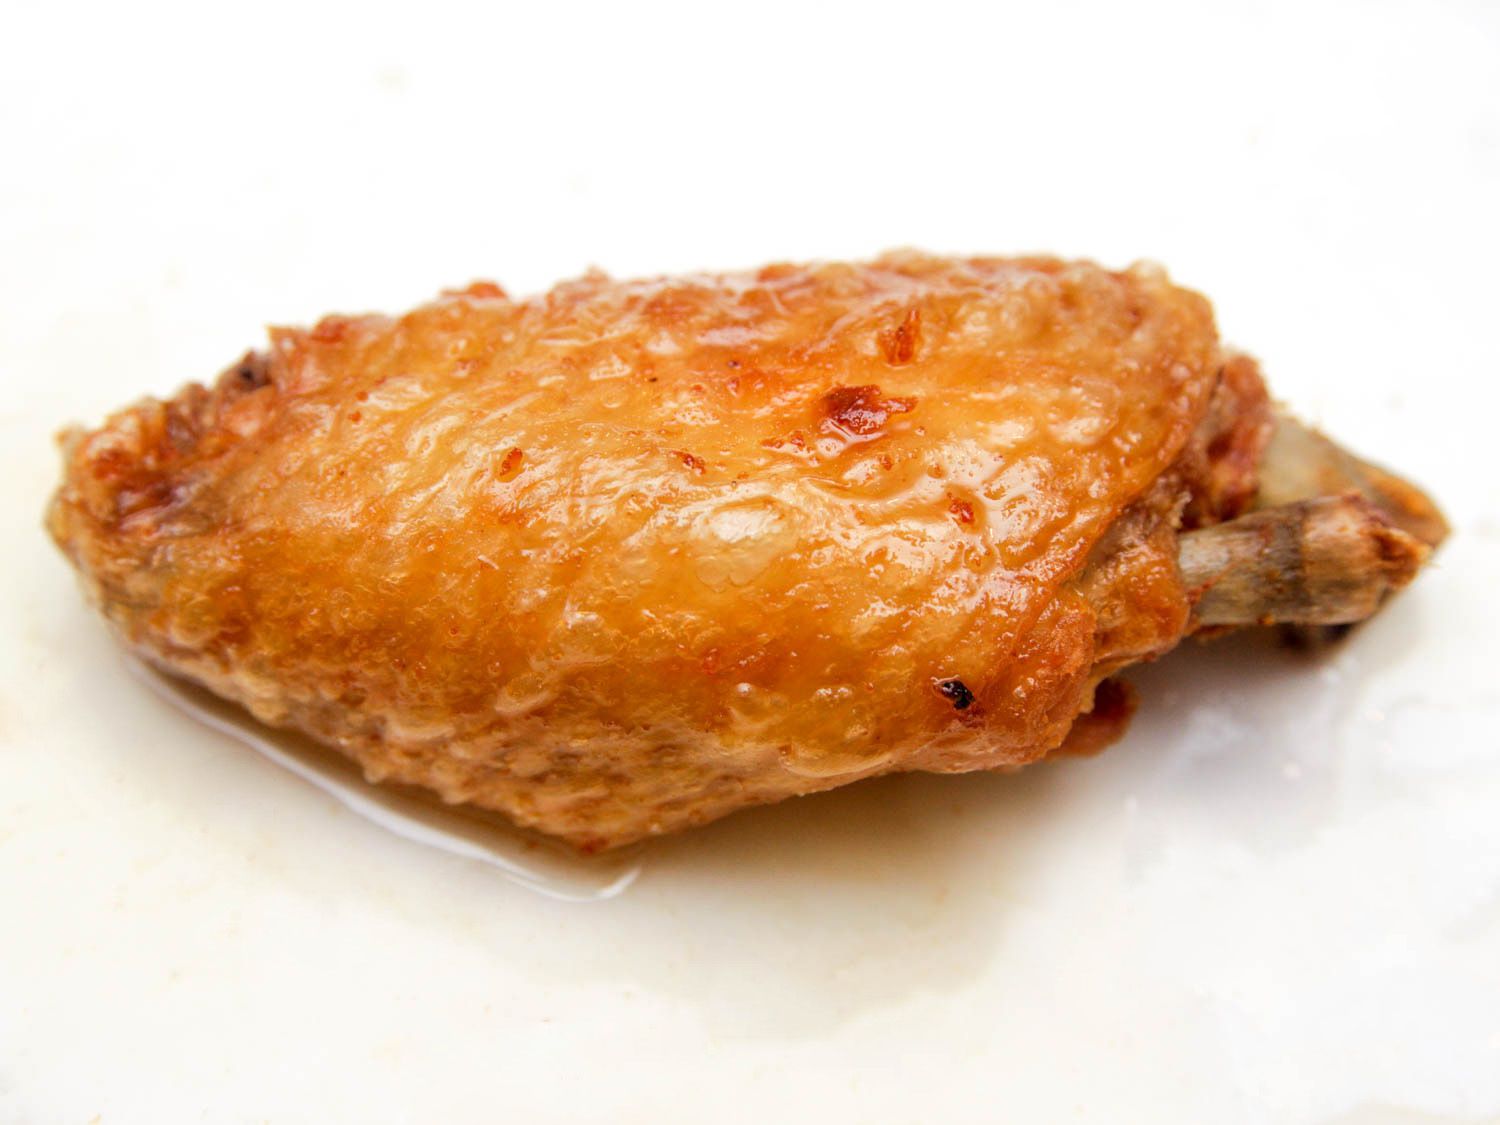 Blistered and bubbled skin on fried chicken wing flat